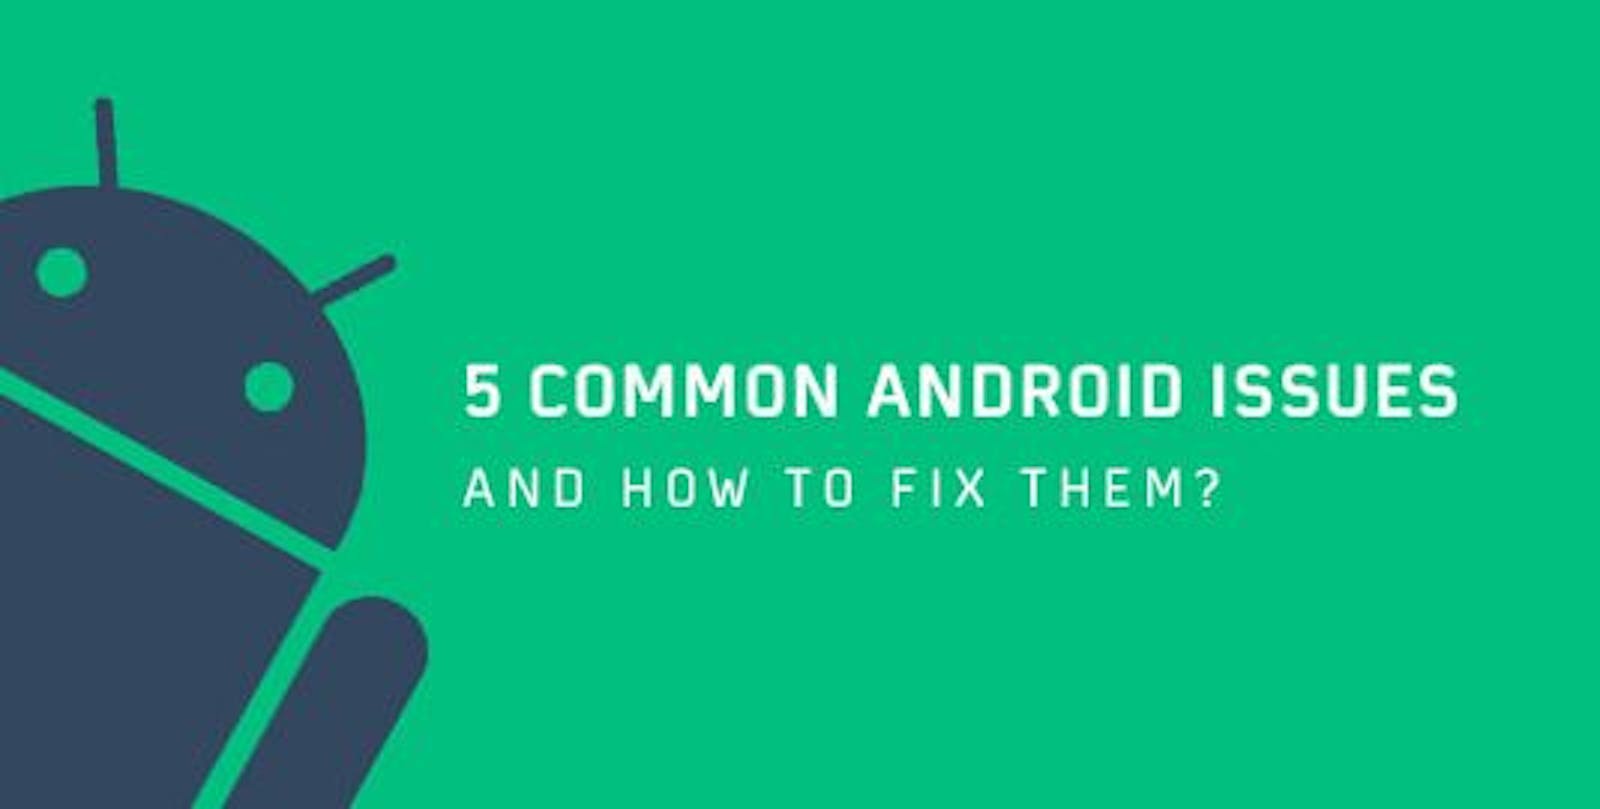 5 Common Android Issues and How To Fix Them